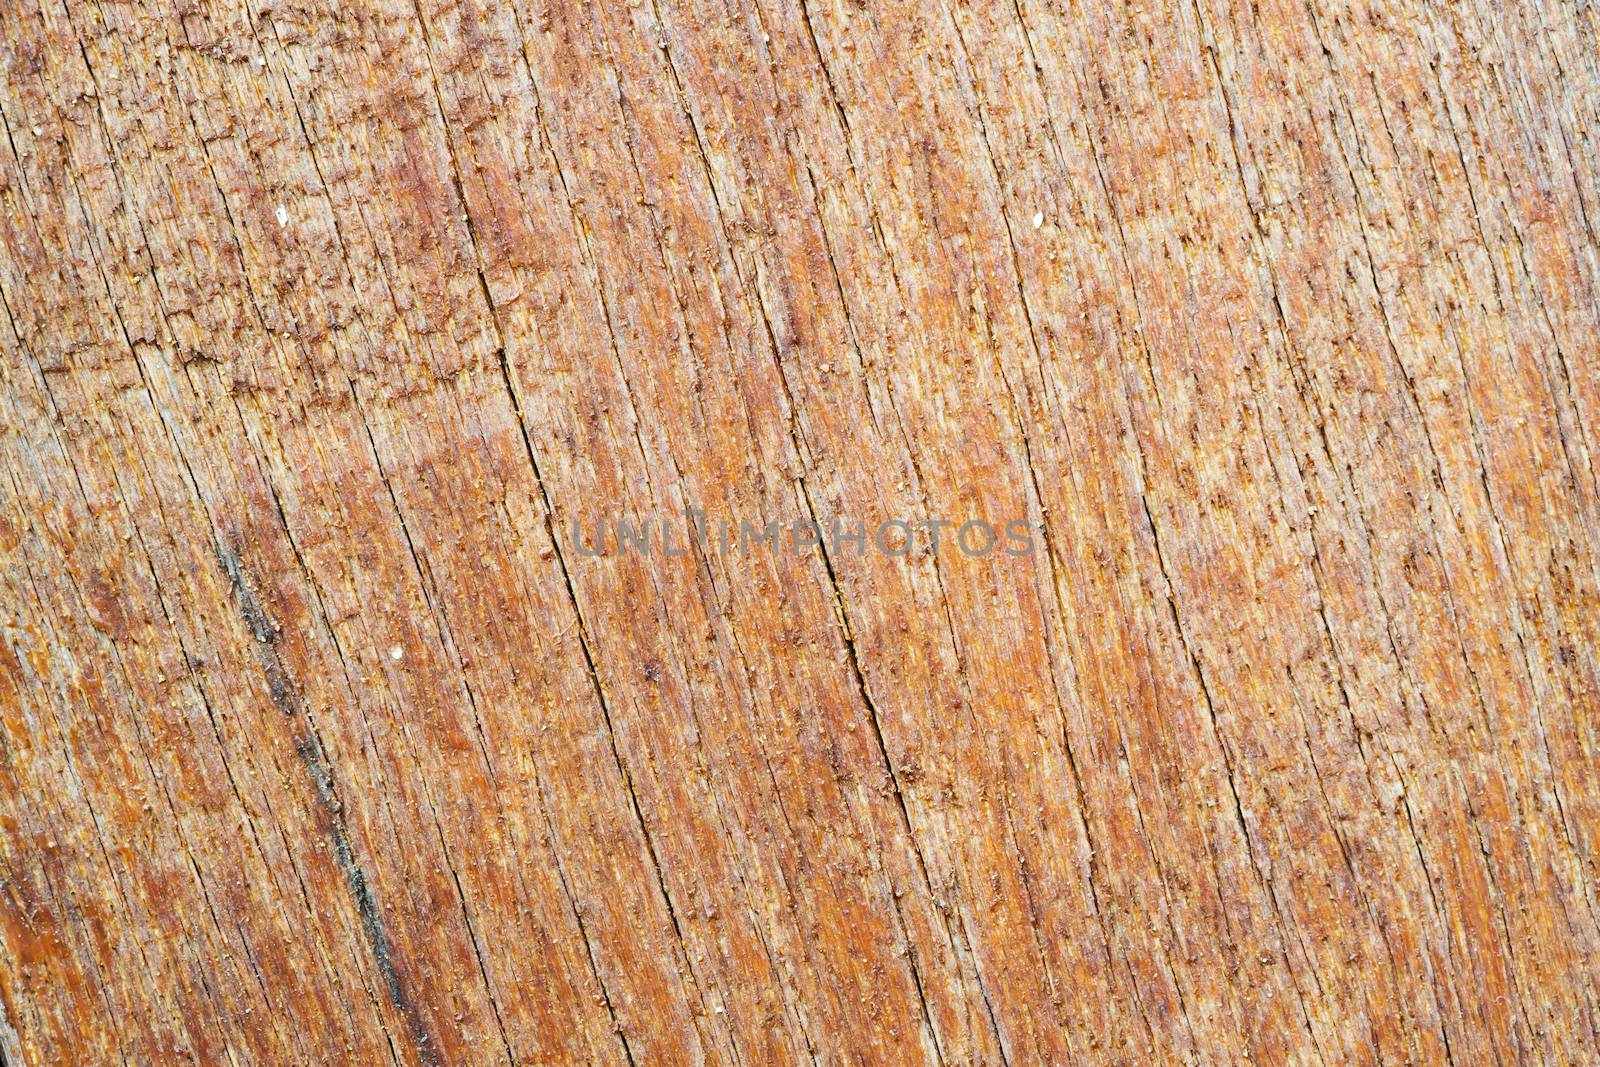 Old and cracked wood texture